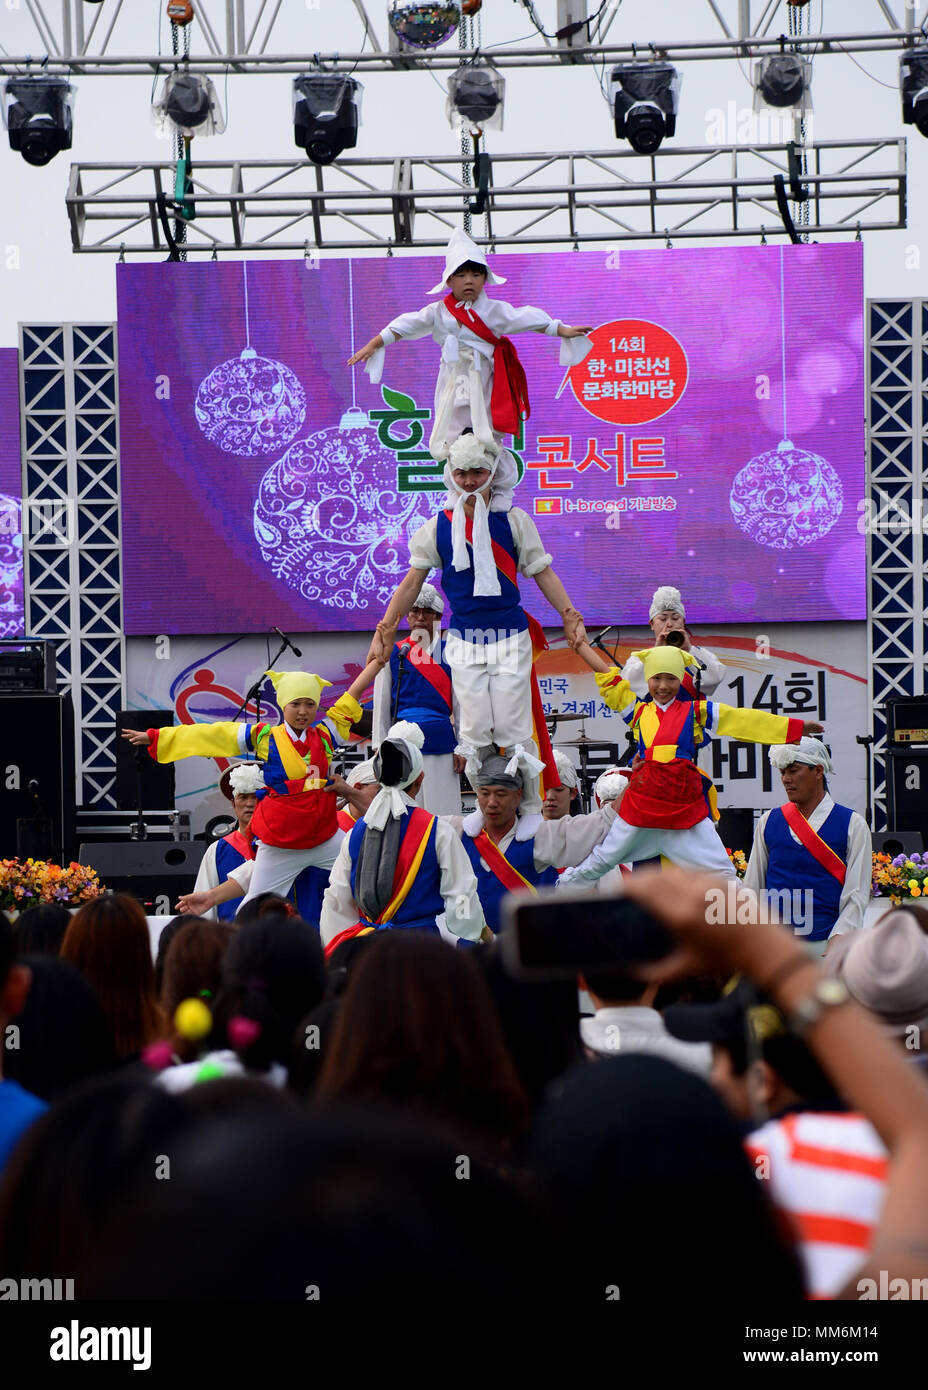 A group of dancers perform a traditional Korean dance during the 14th Annual Korean American Cultural Friendship Festival near Osan Air Base, September 9, 2017. The festival is a two day celebration of the united community between the Korean and American people near Osan Air Base. (U.S. Air Force photo by Staff Sgt. Tinese Jackson) Stock Photo